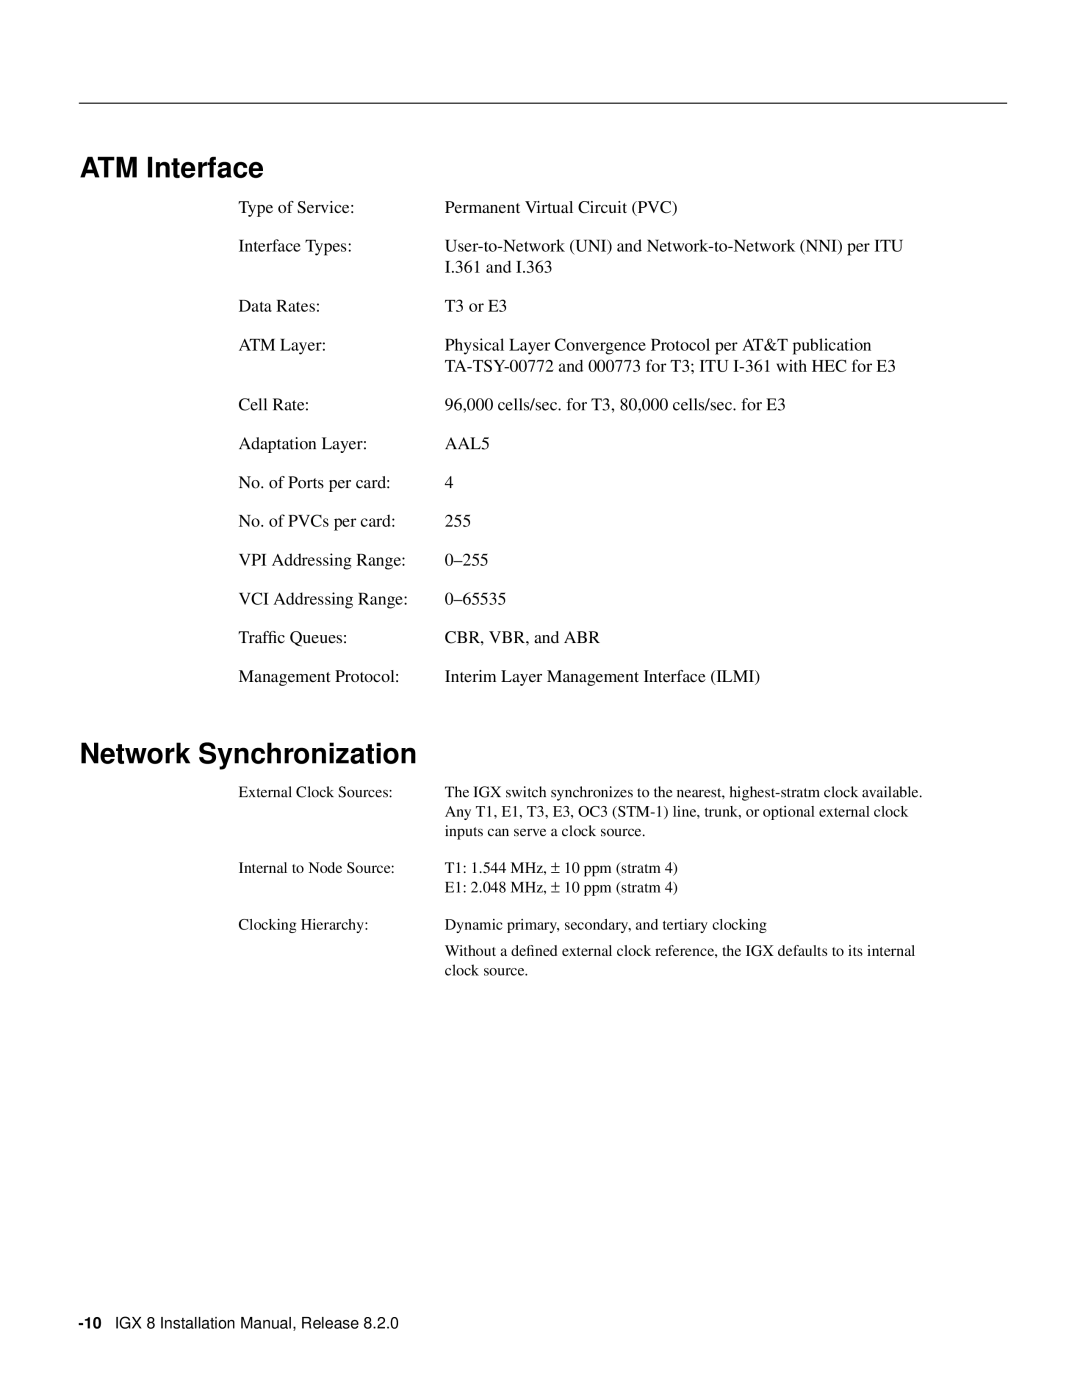 Cisco Systems appendix ATM Interface, Network Synchronization, IGX 8 Installation Manual, Release 